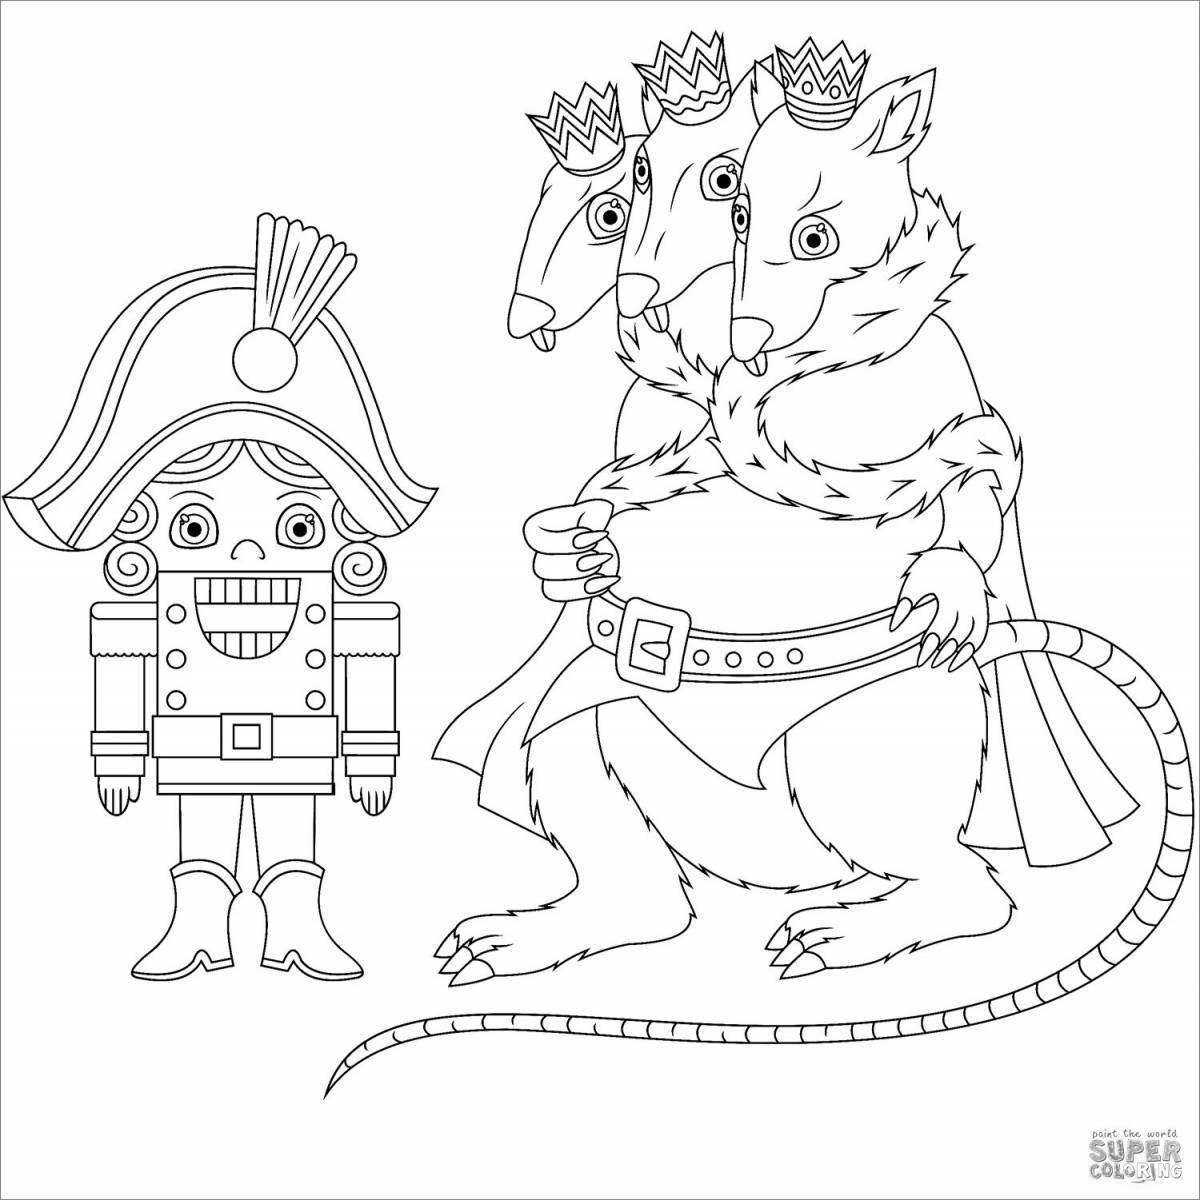 Glorious nutcracker poster coloring page